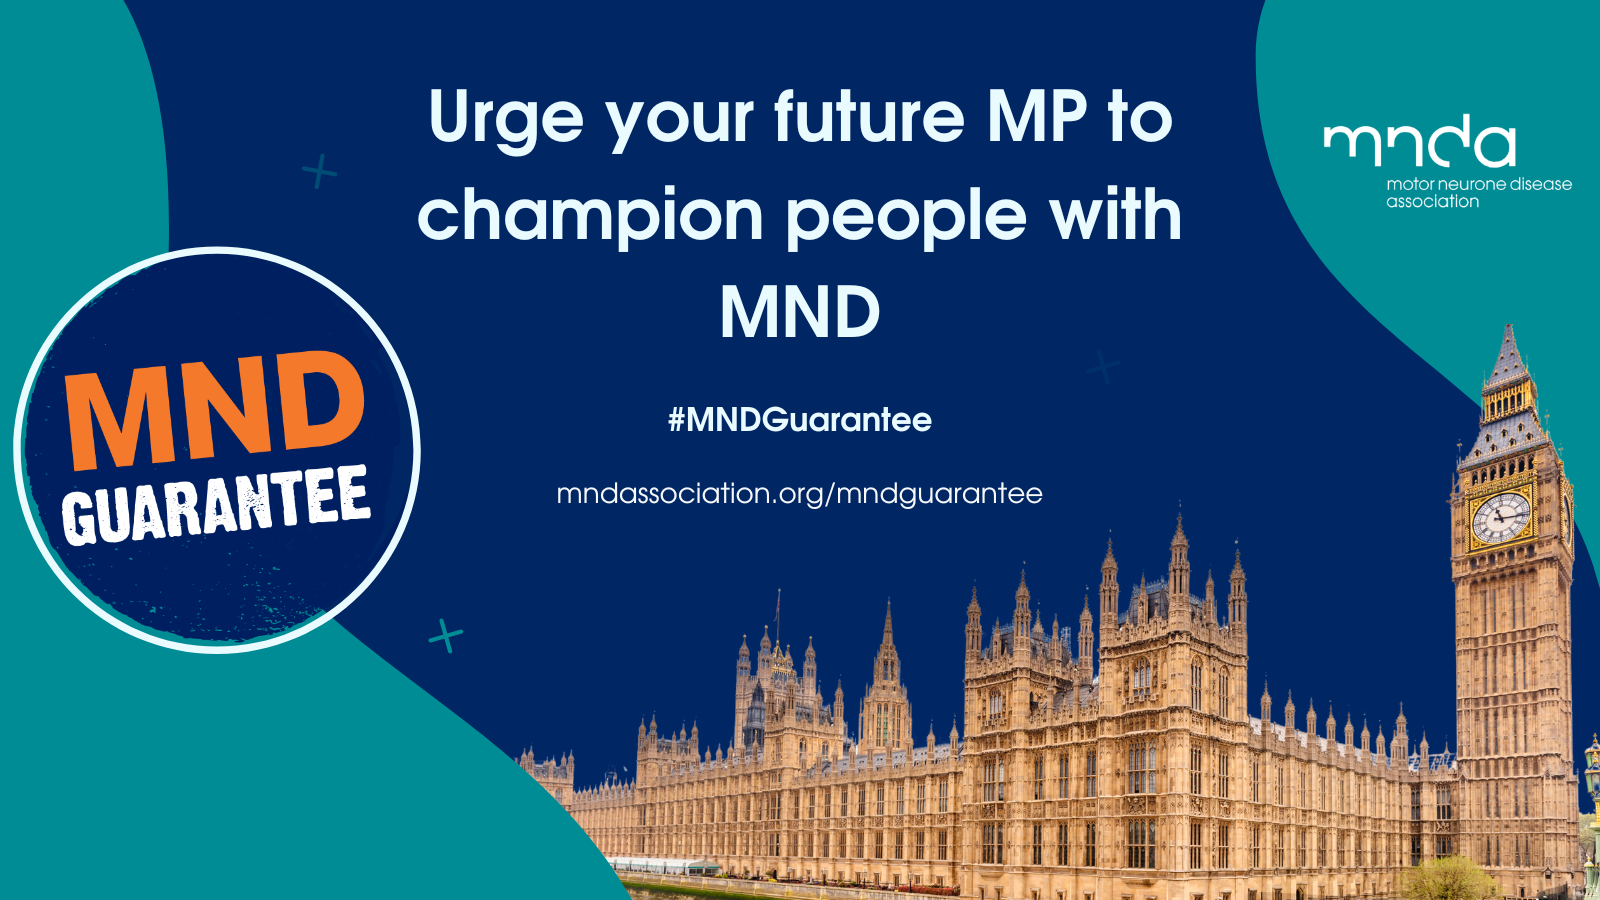 Text reads urge your future MP to champion people with MND. MND Association logo and MND Guarantee campaign logo also appear.